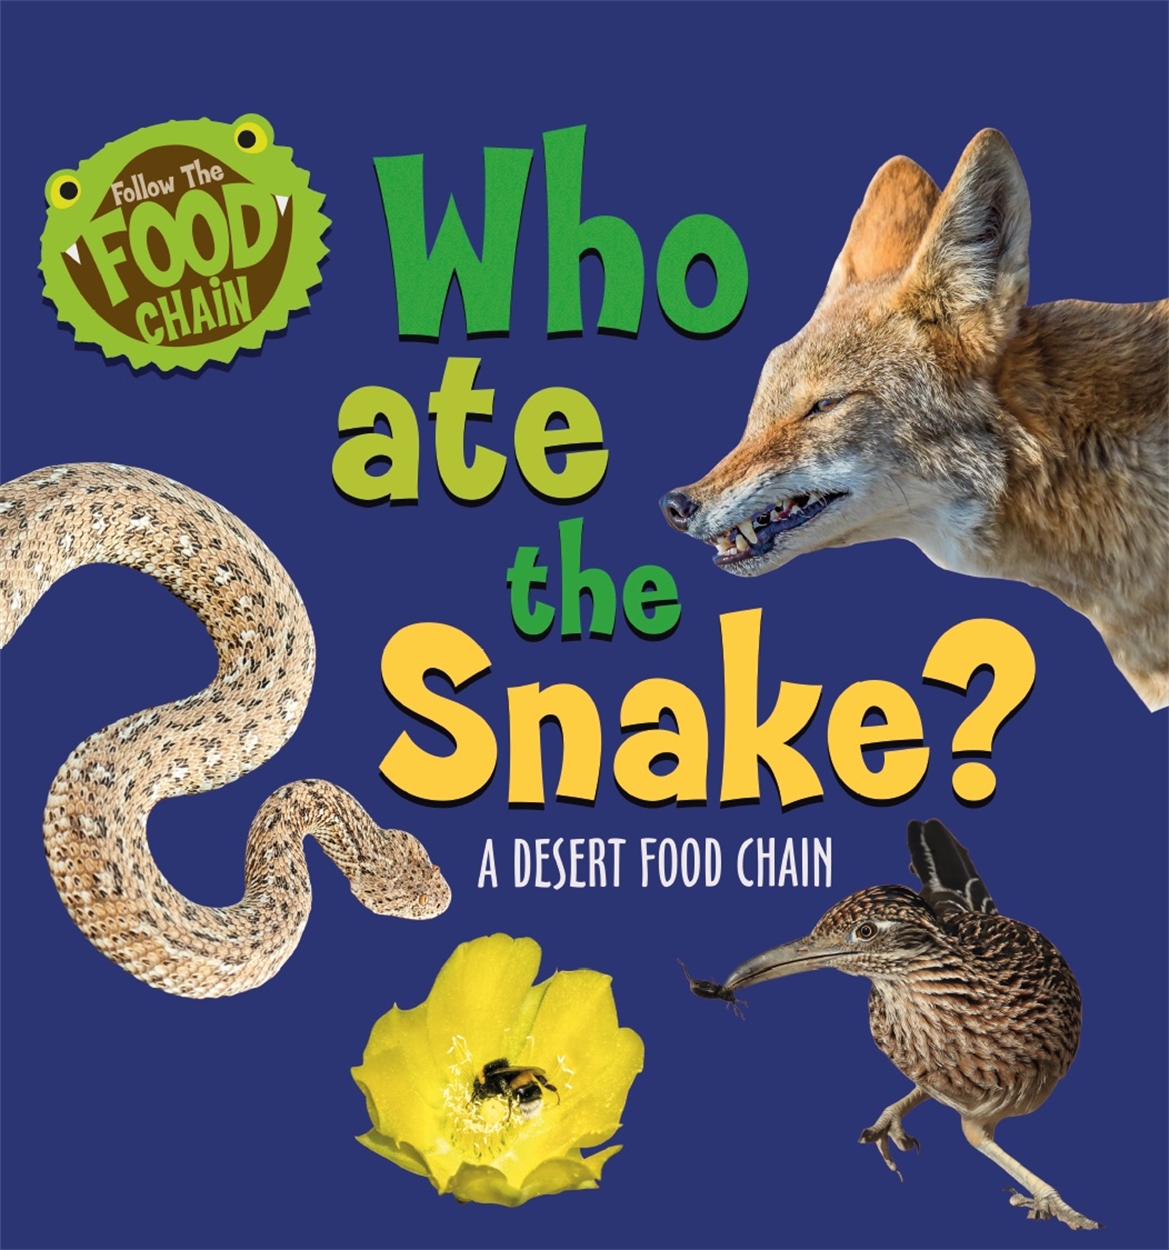 Follow the Food Chain: Who Ate the Snake? by Sarah Ridley | Hachette UK